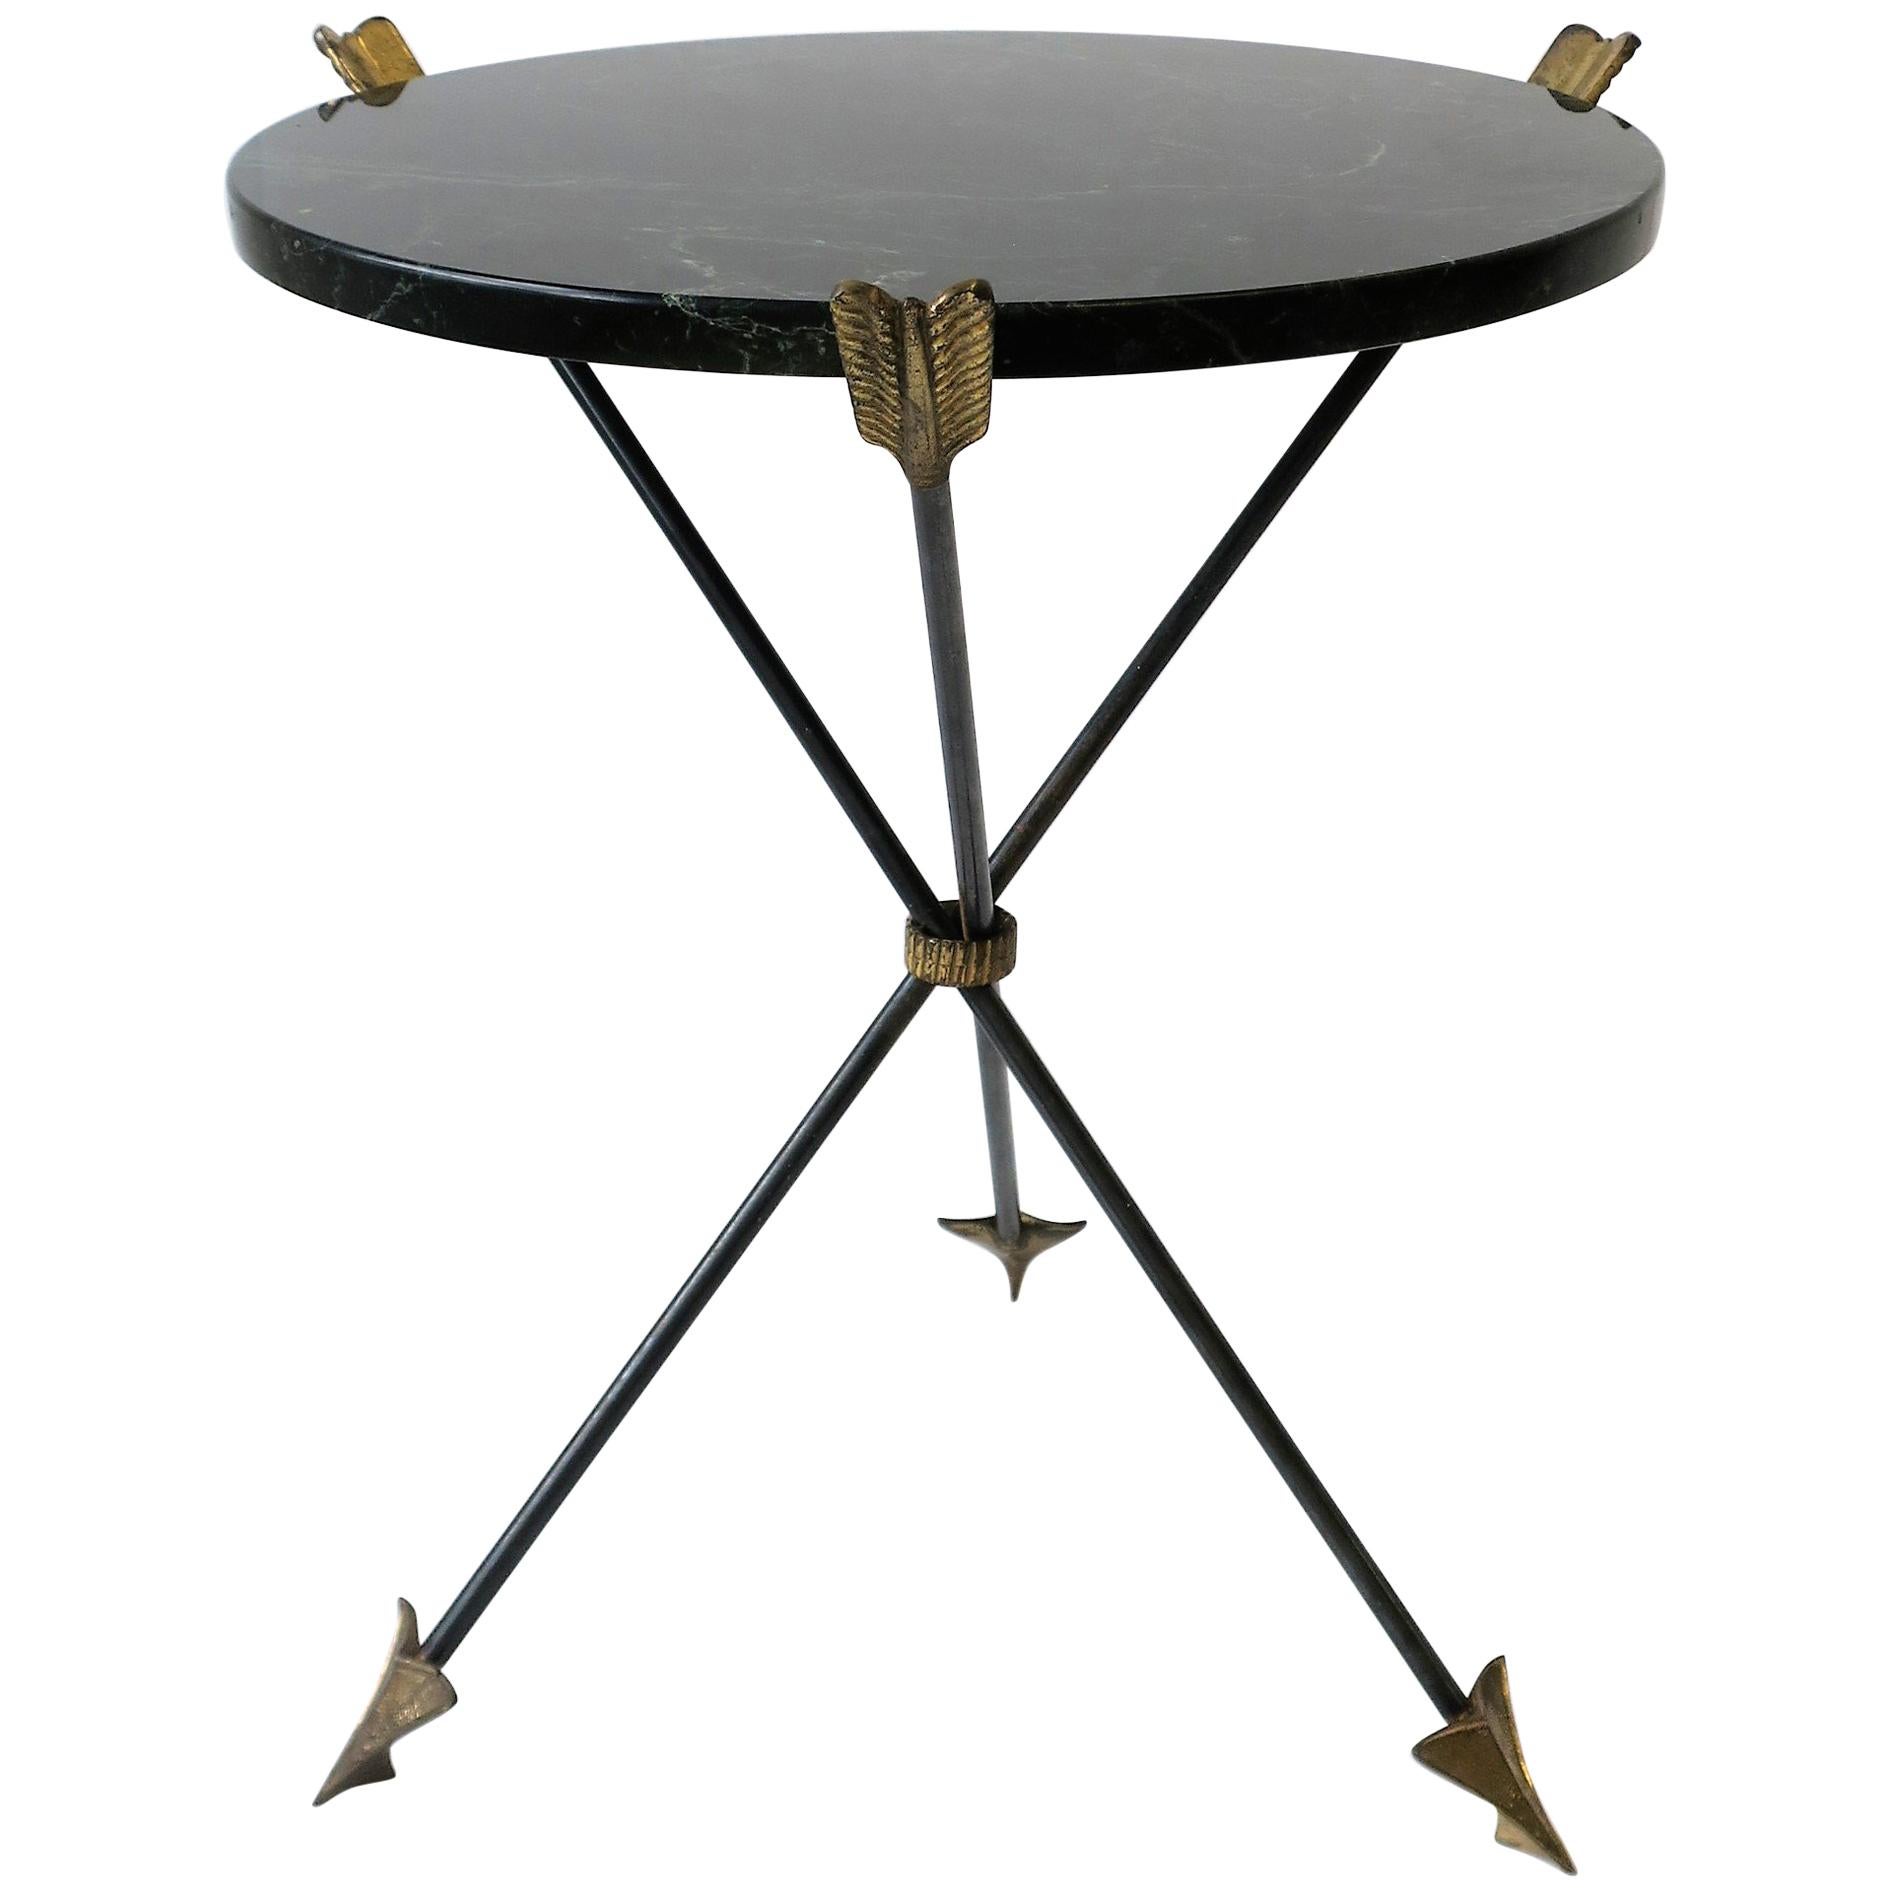 Italian Neoclassical Marble and Brass Tripod Side Table or Guéridon